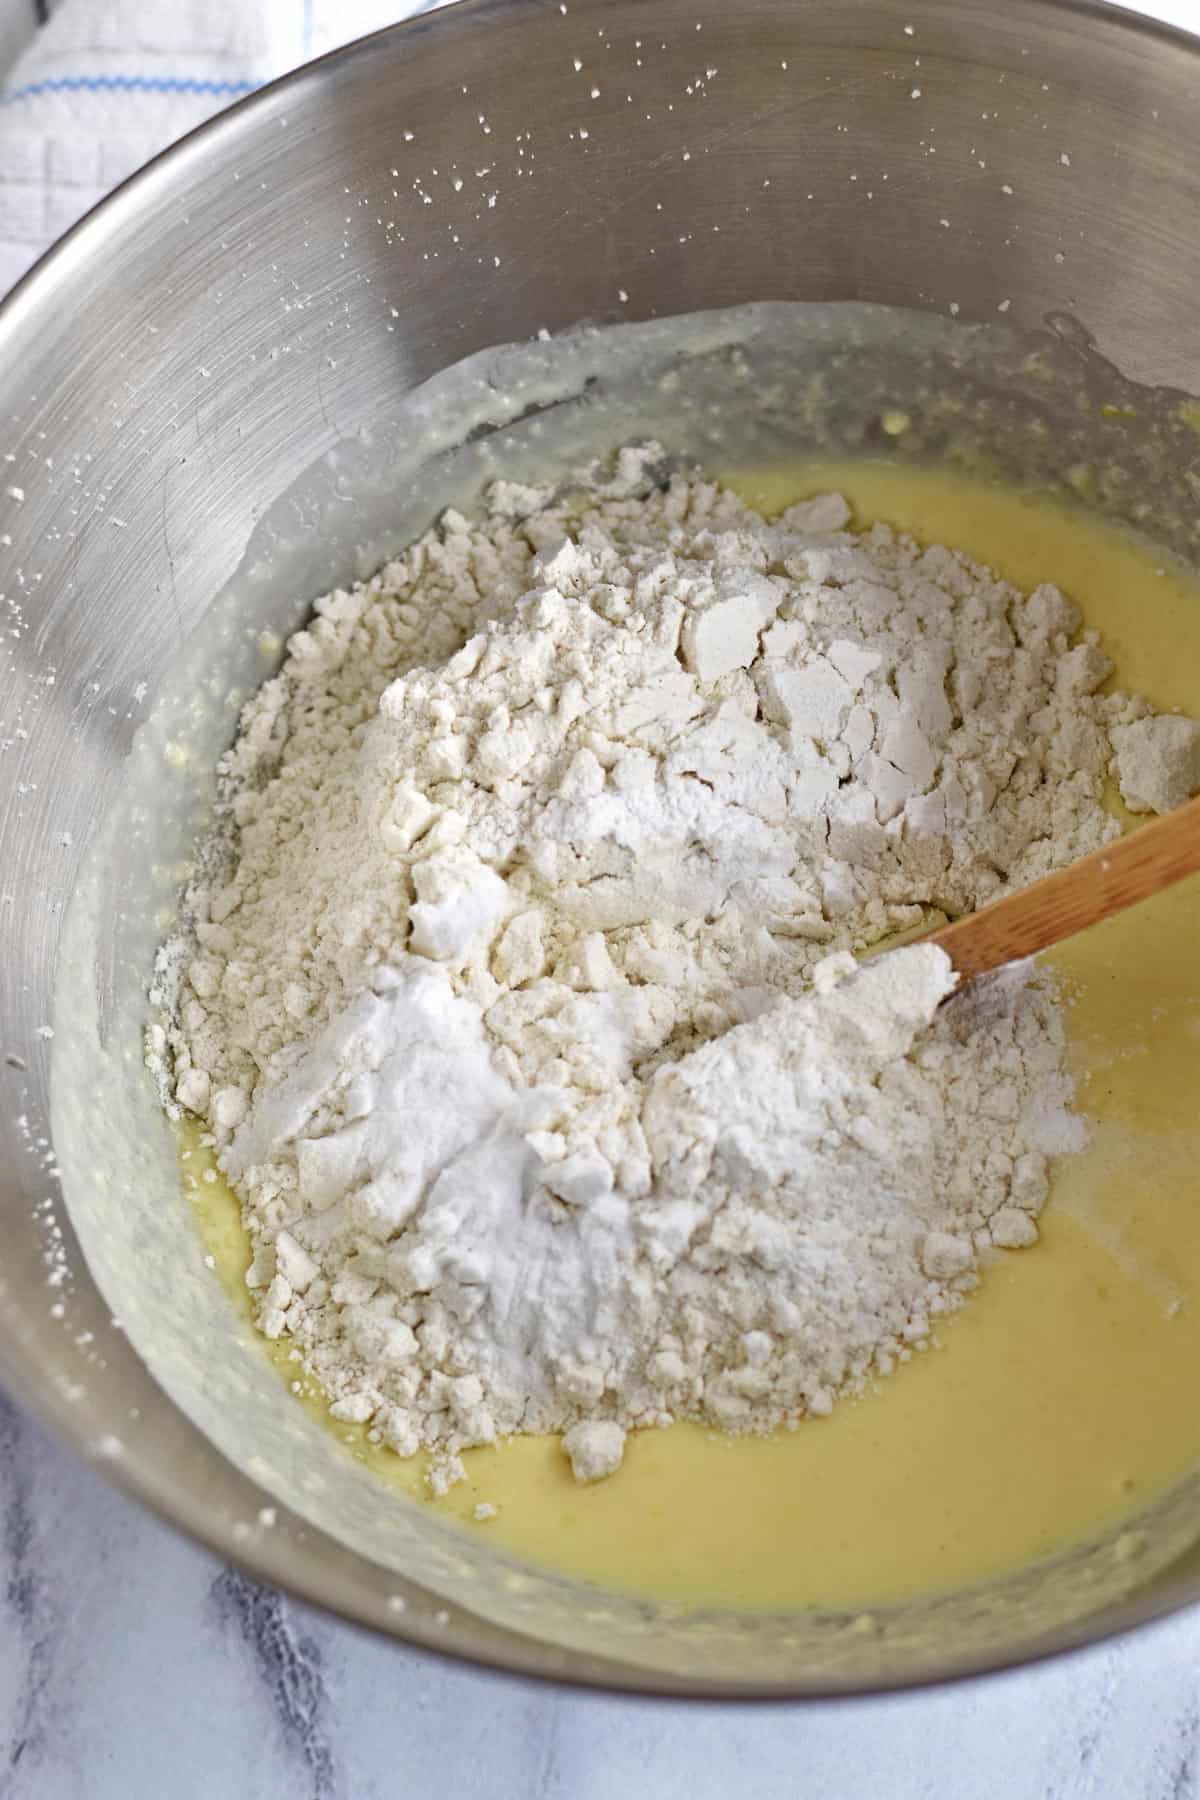 Dry ingredients being added to lemon blueberry bread batter.